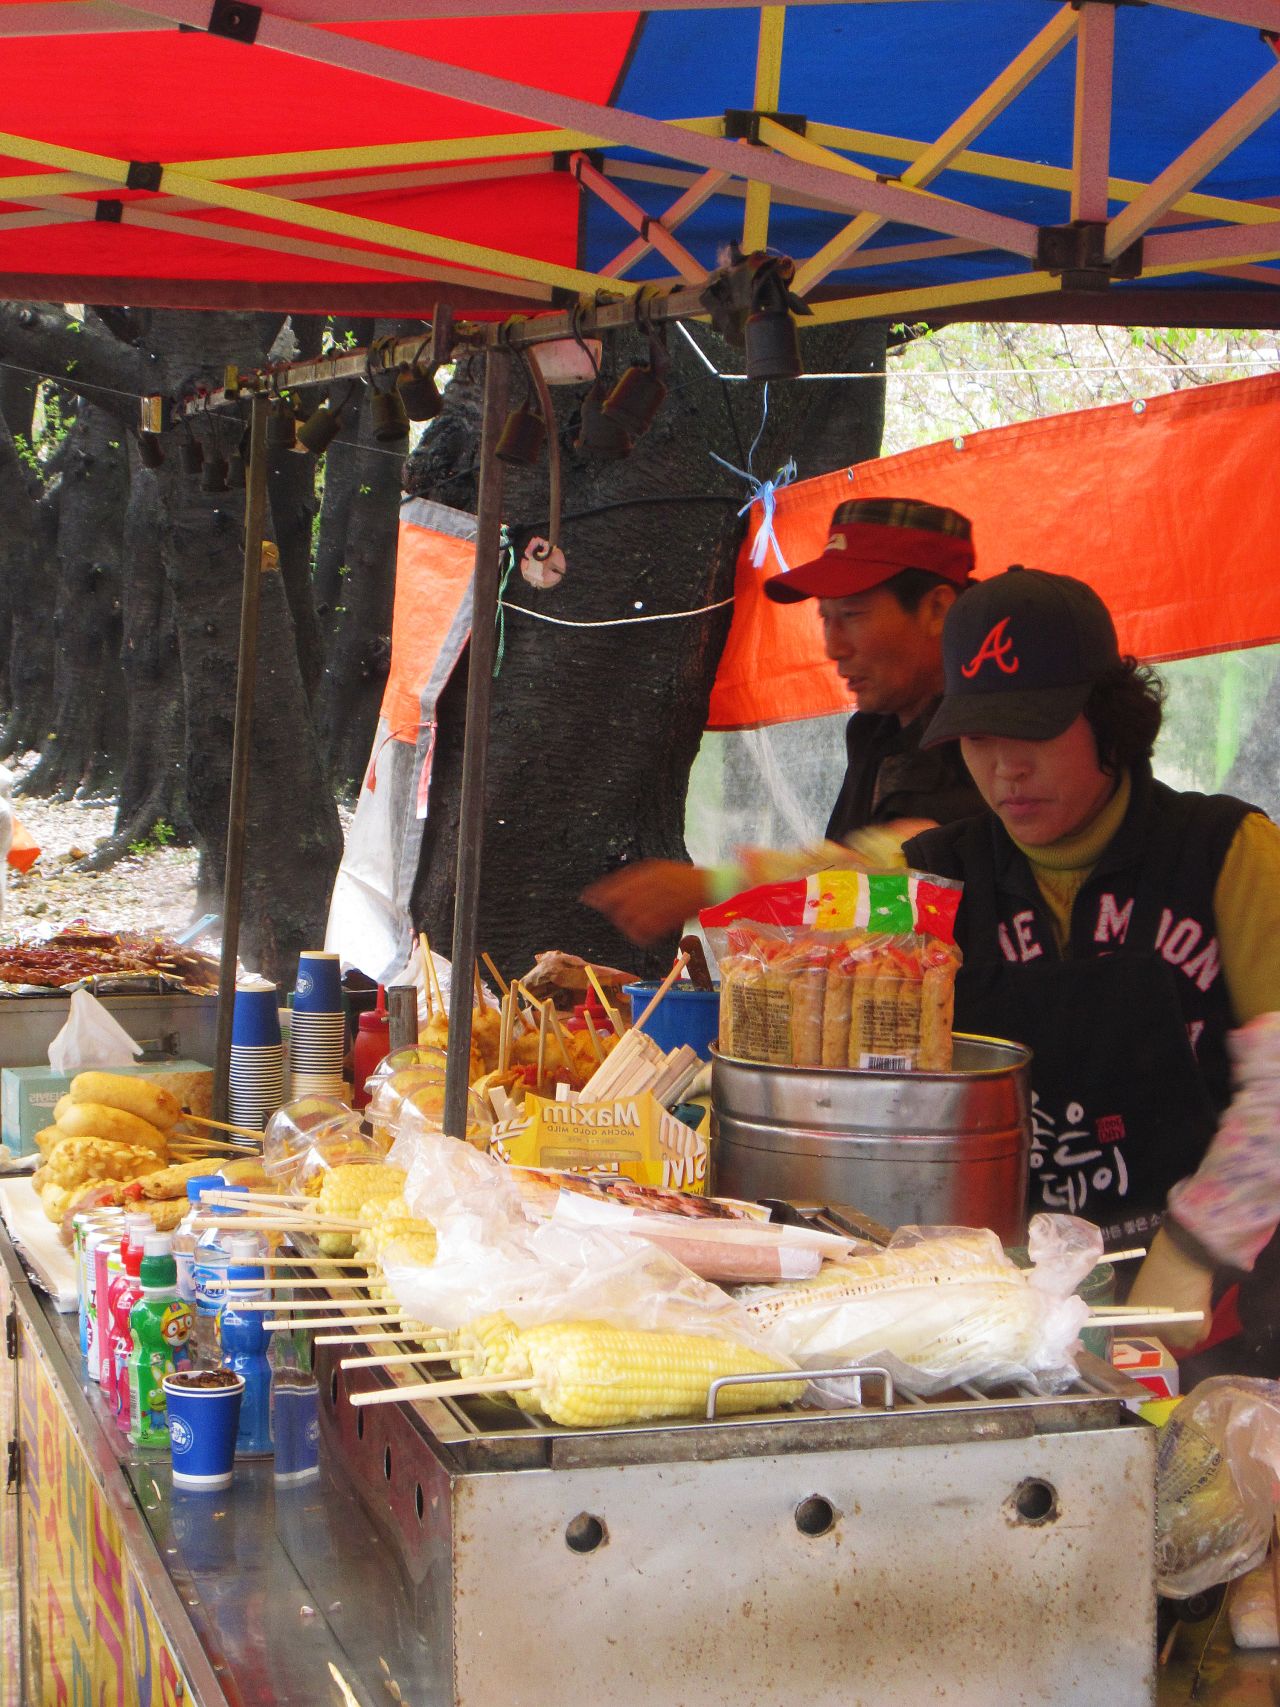 Cheap, abundant, varied and delicious, festival food carts supply a delicious selection of all things fried, grilled and glutinous. 